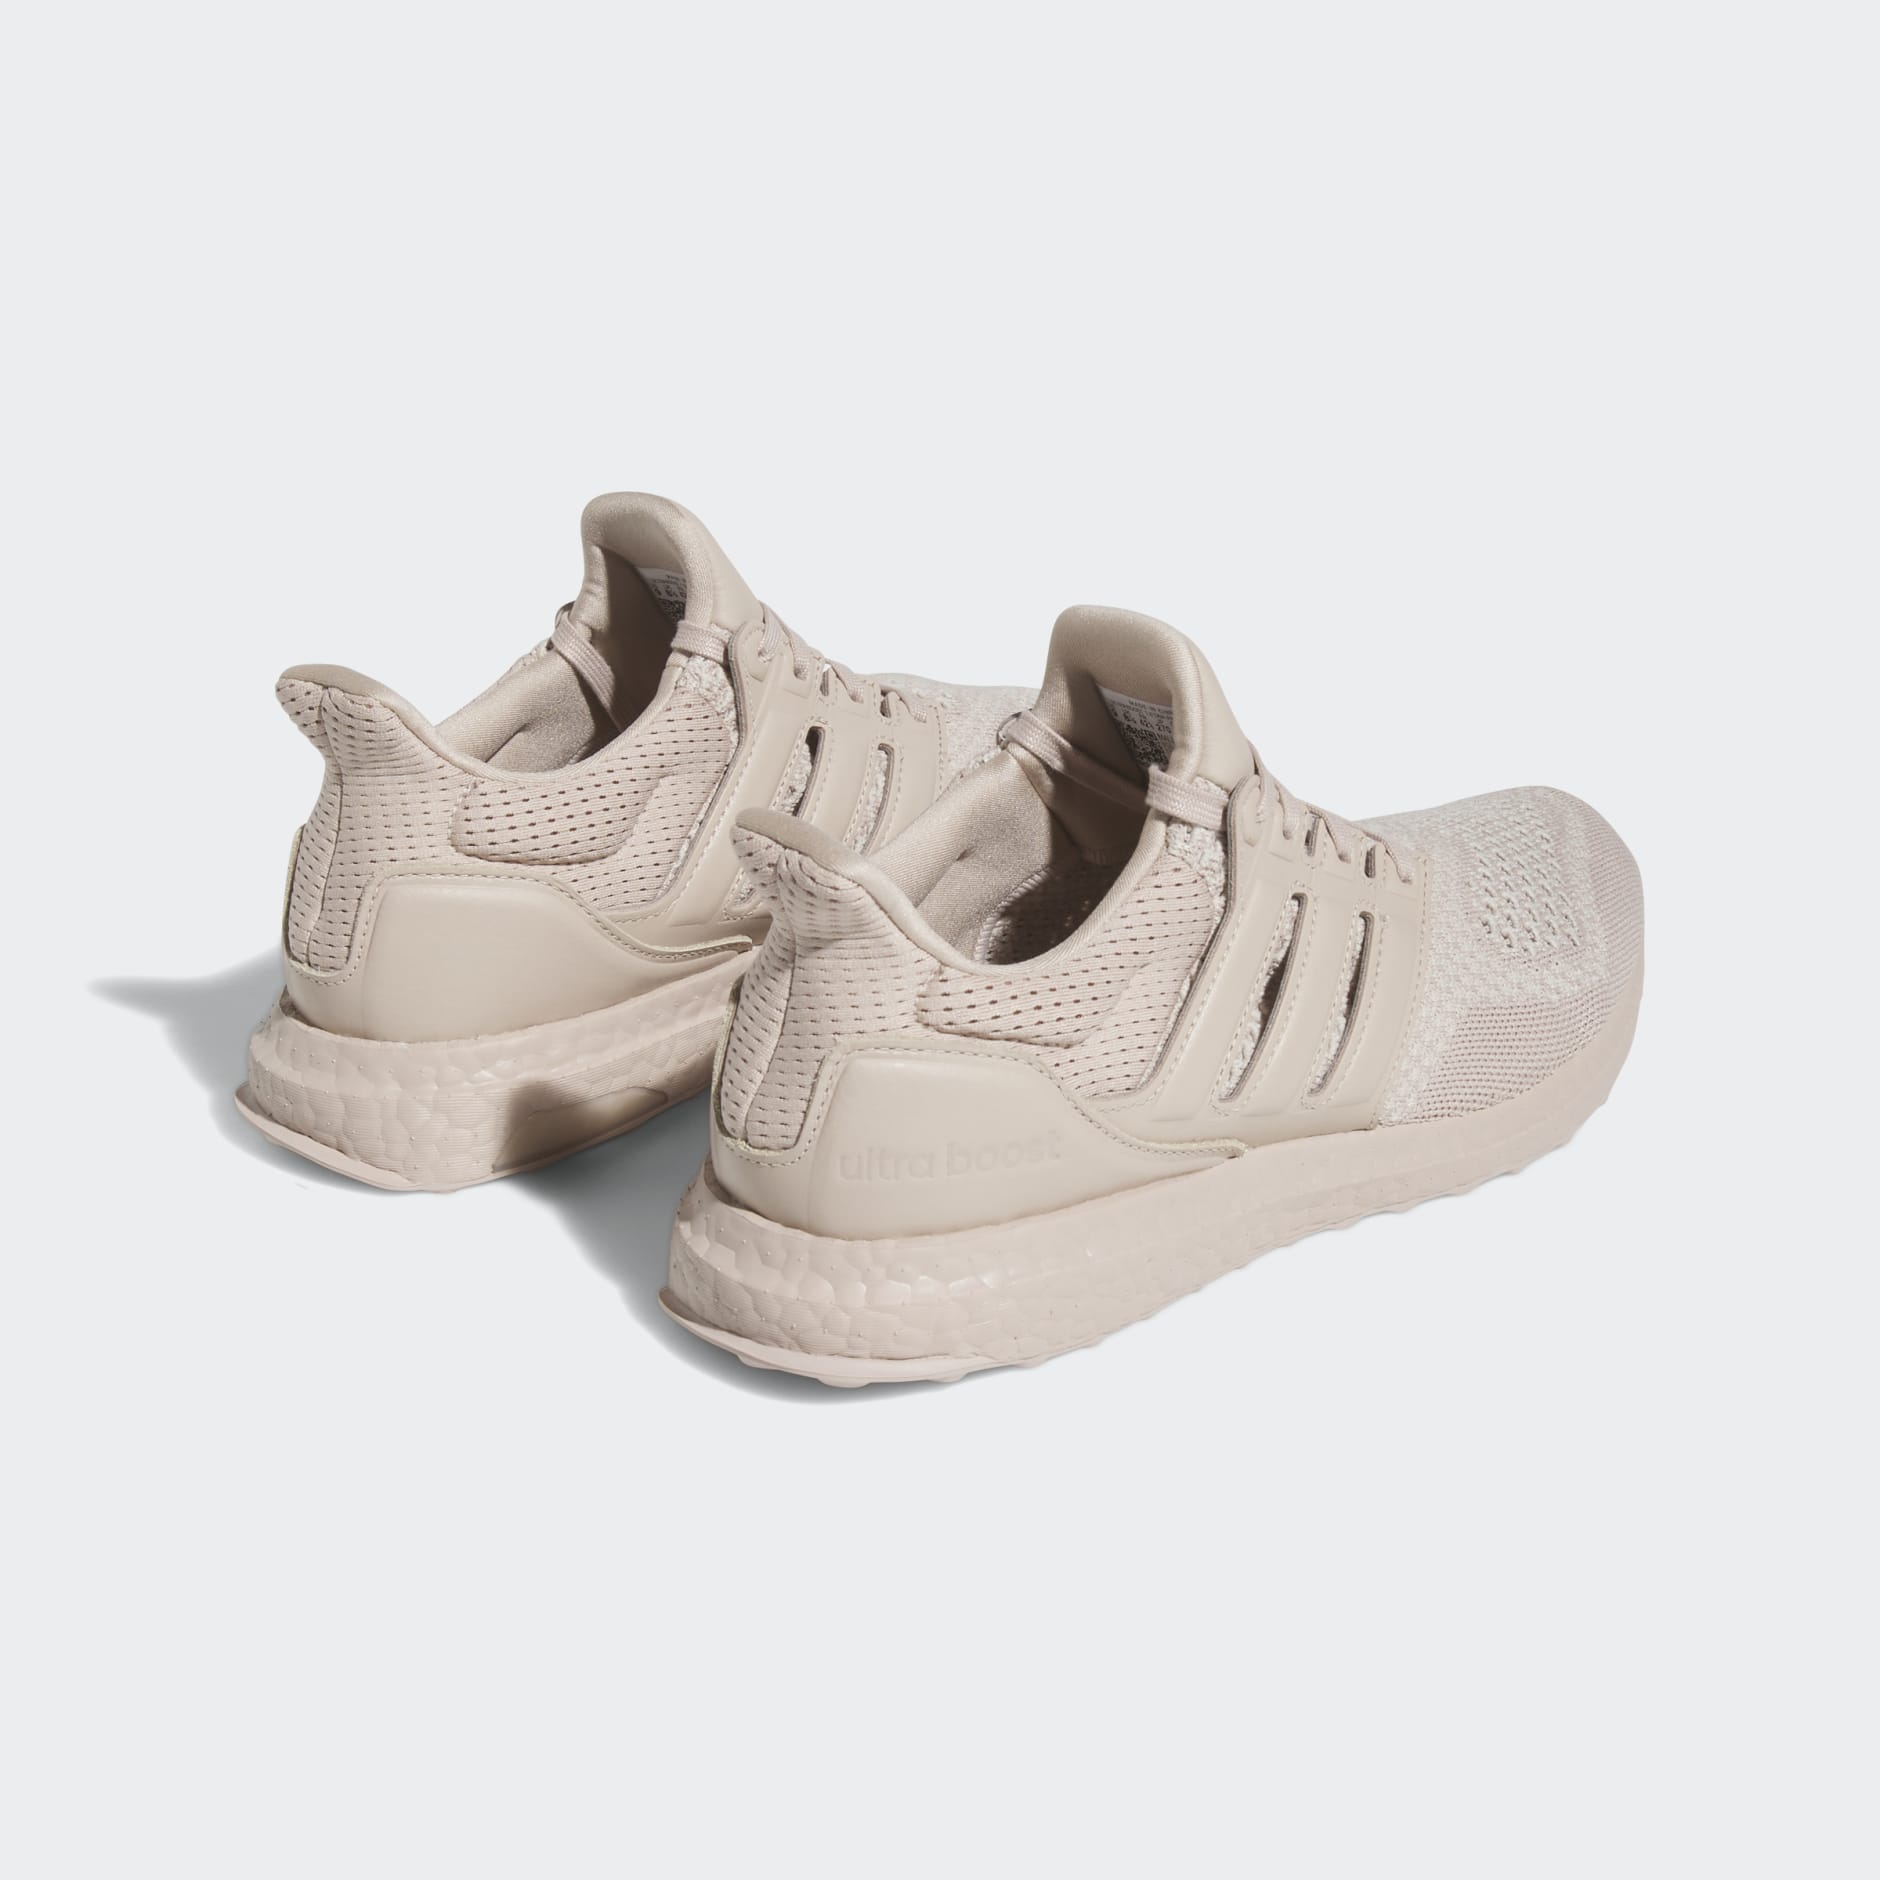 Men's Shoes - Ultraboost 1.0 Shoes - Brown | adidas Egypt